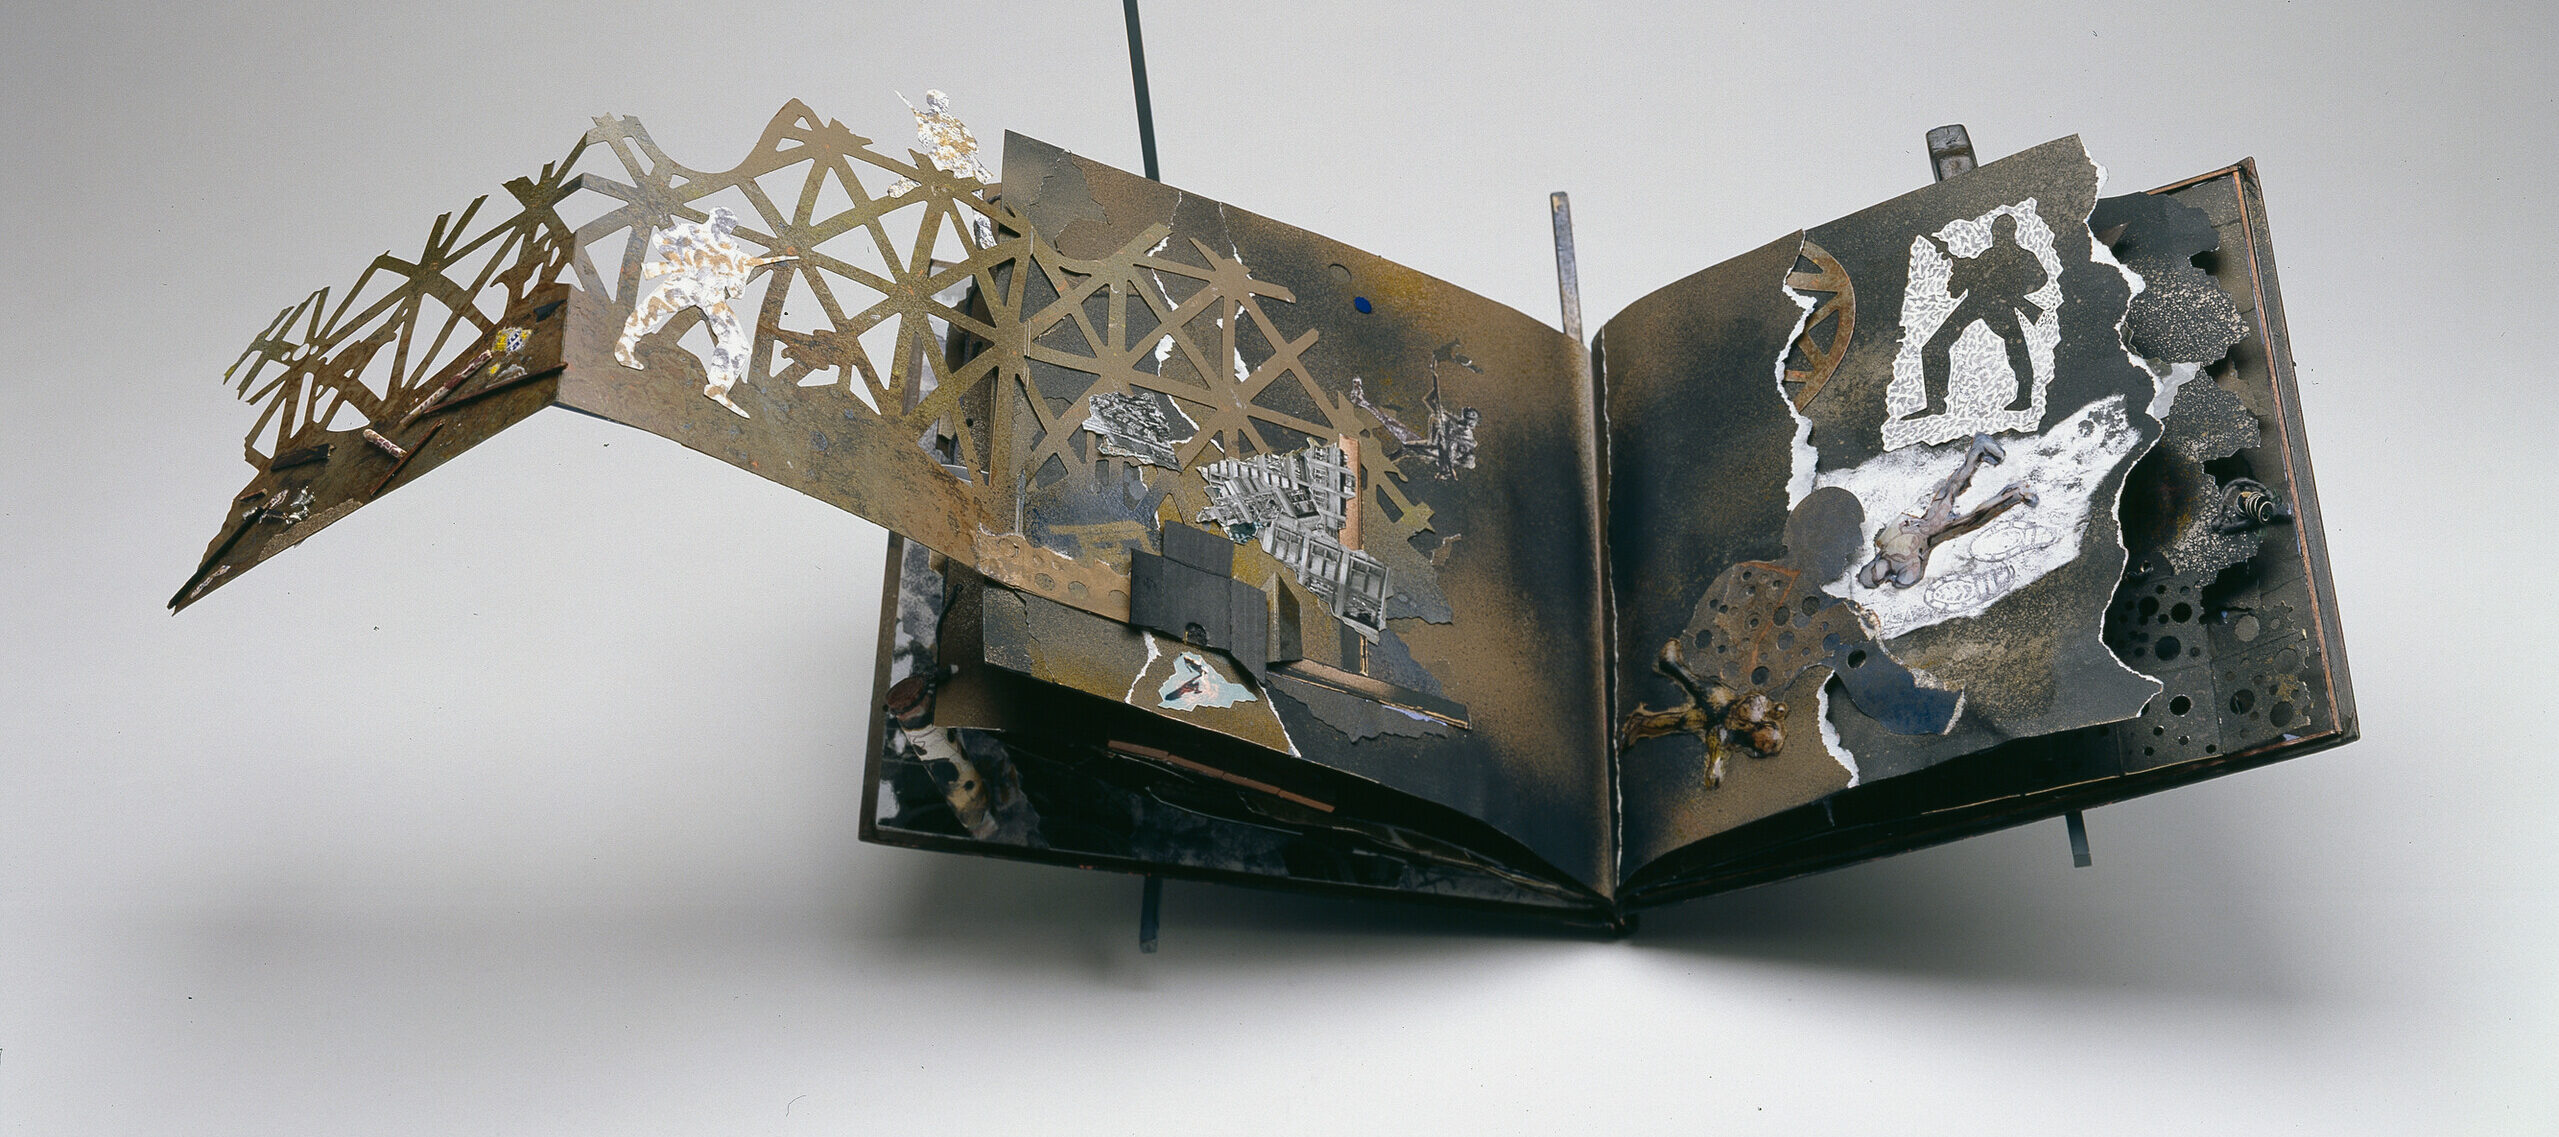 An artist book sits open on a grey background. The open pages reveal a collage filled with scenes of war: soldiers, barbed wire, and ammunition. A toy version of a military helicopter protrudes from the cover of the book.